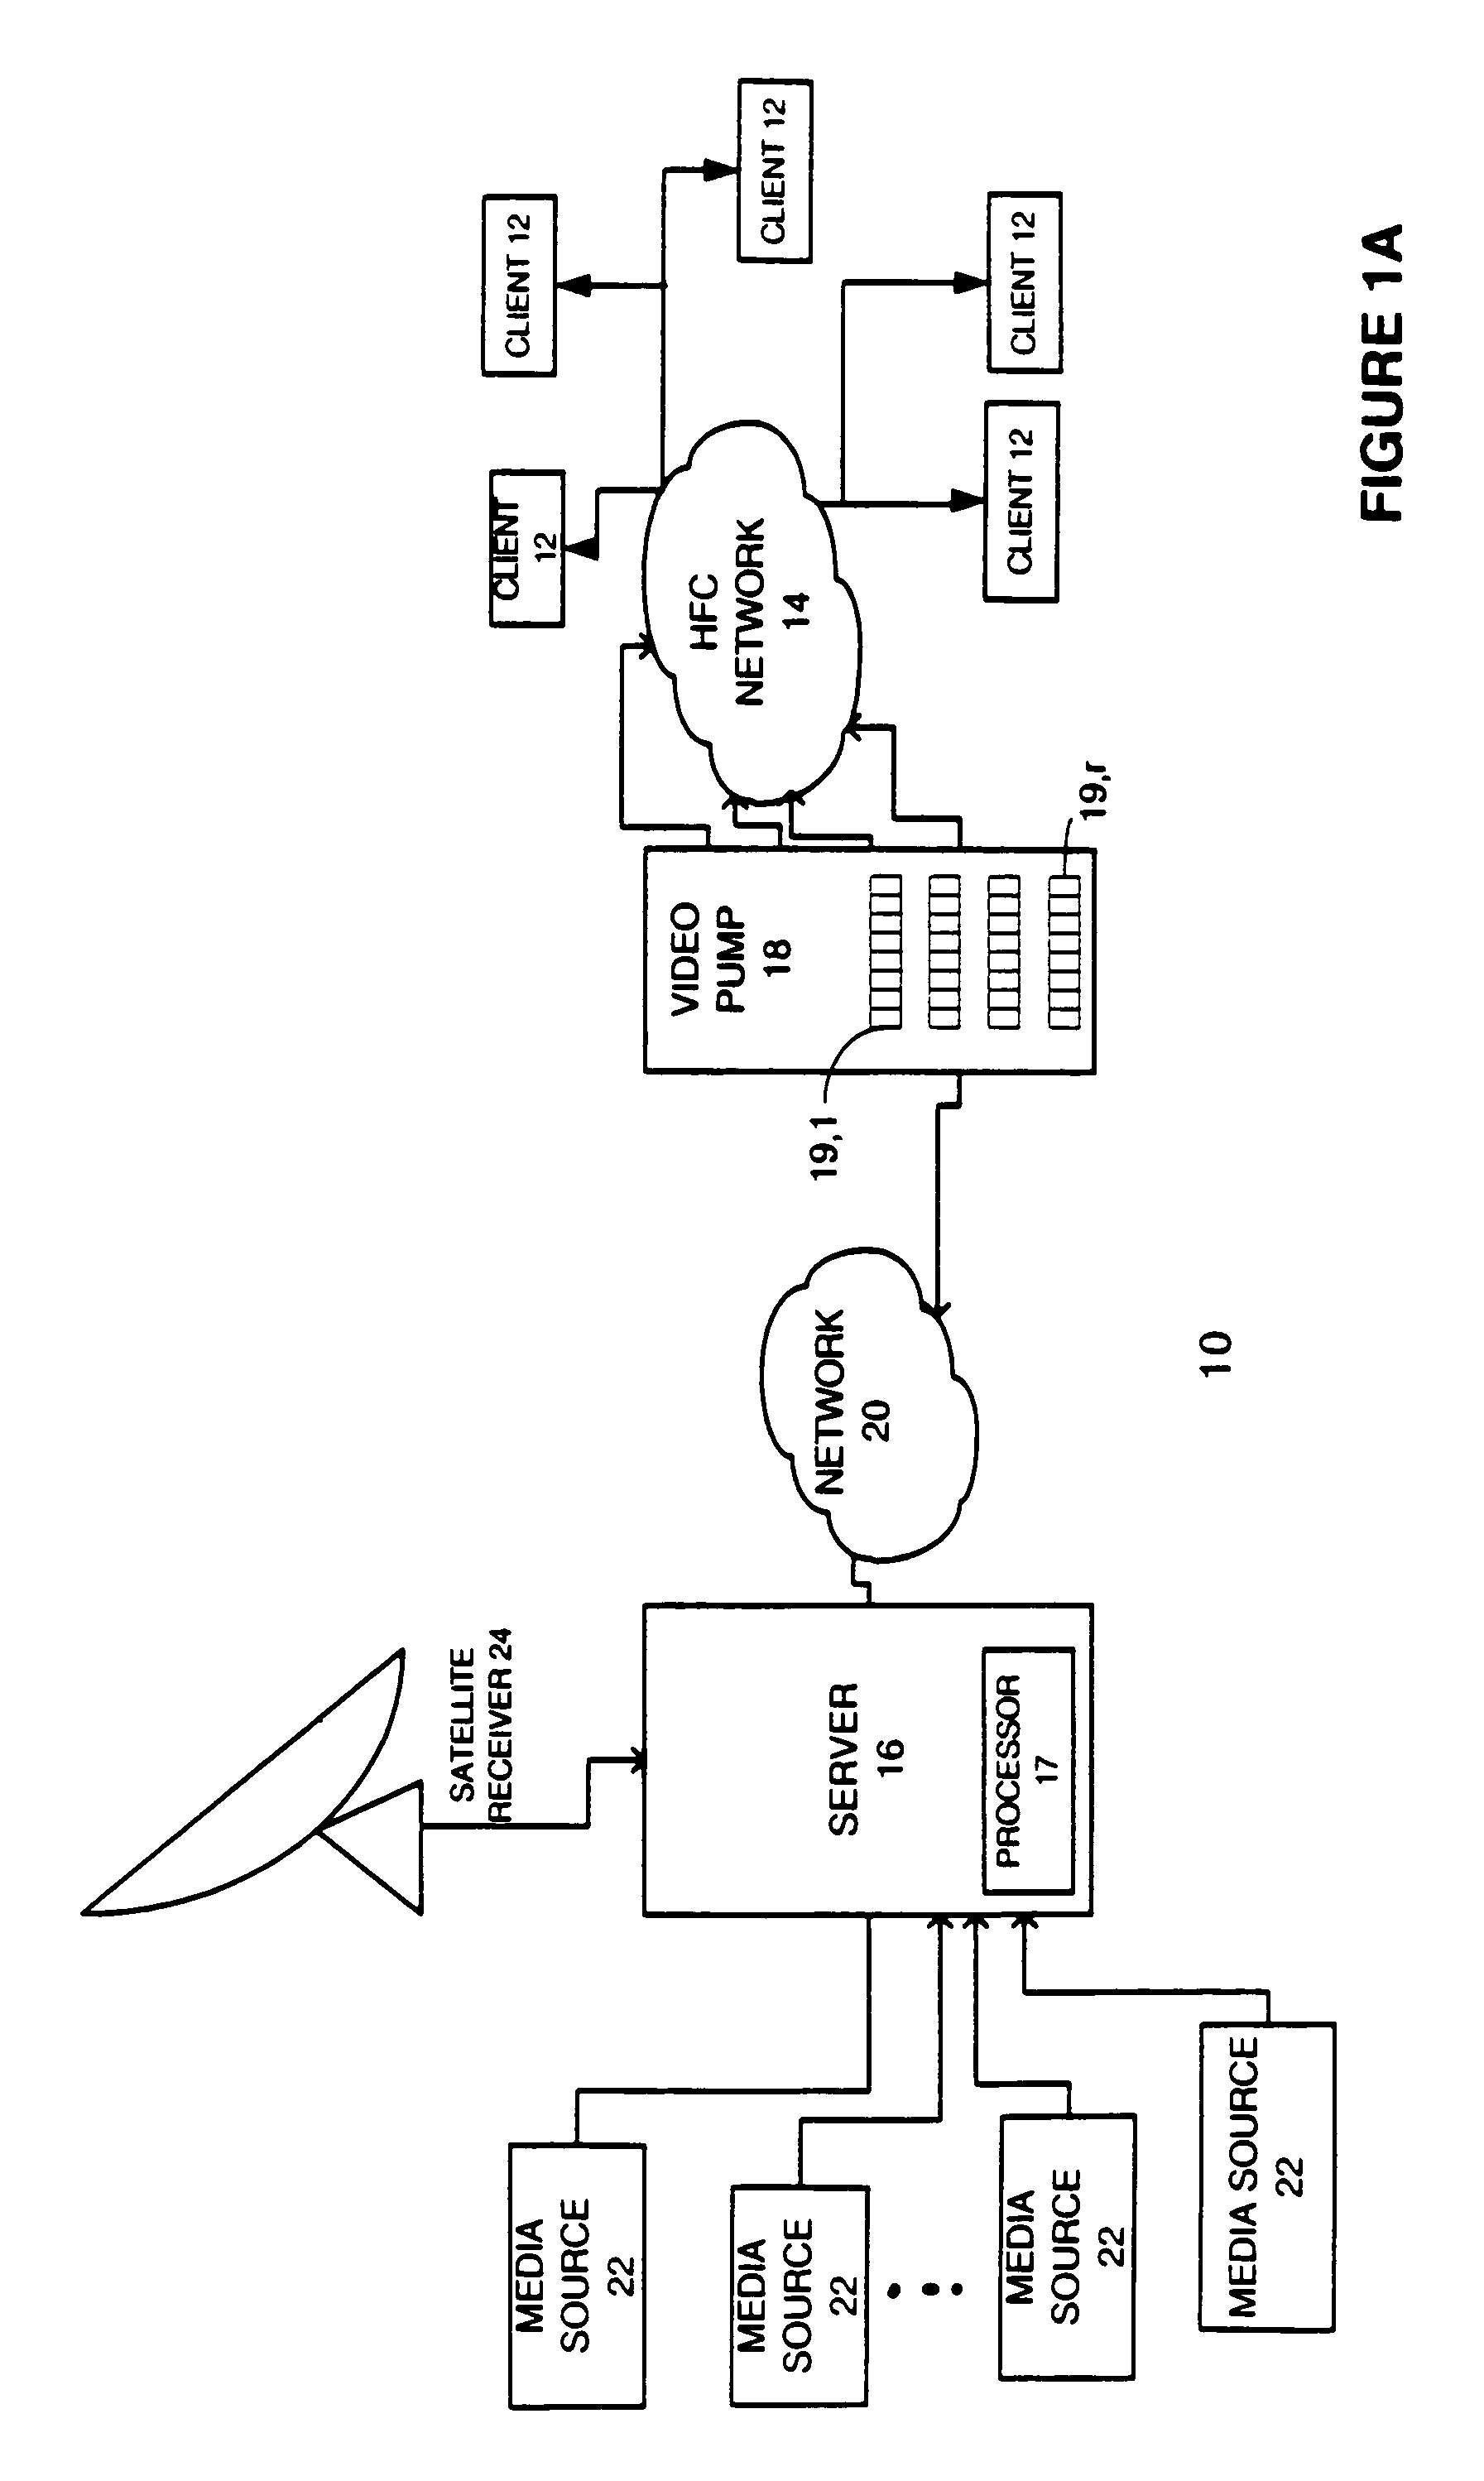 System and method for providing trick modes